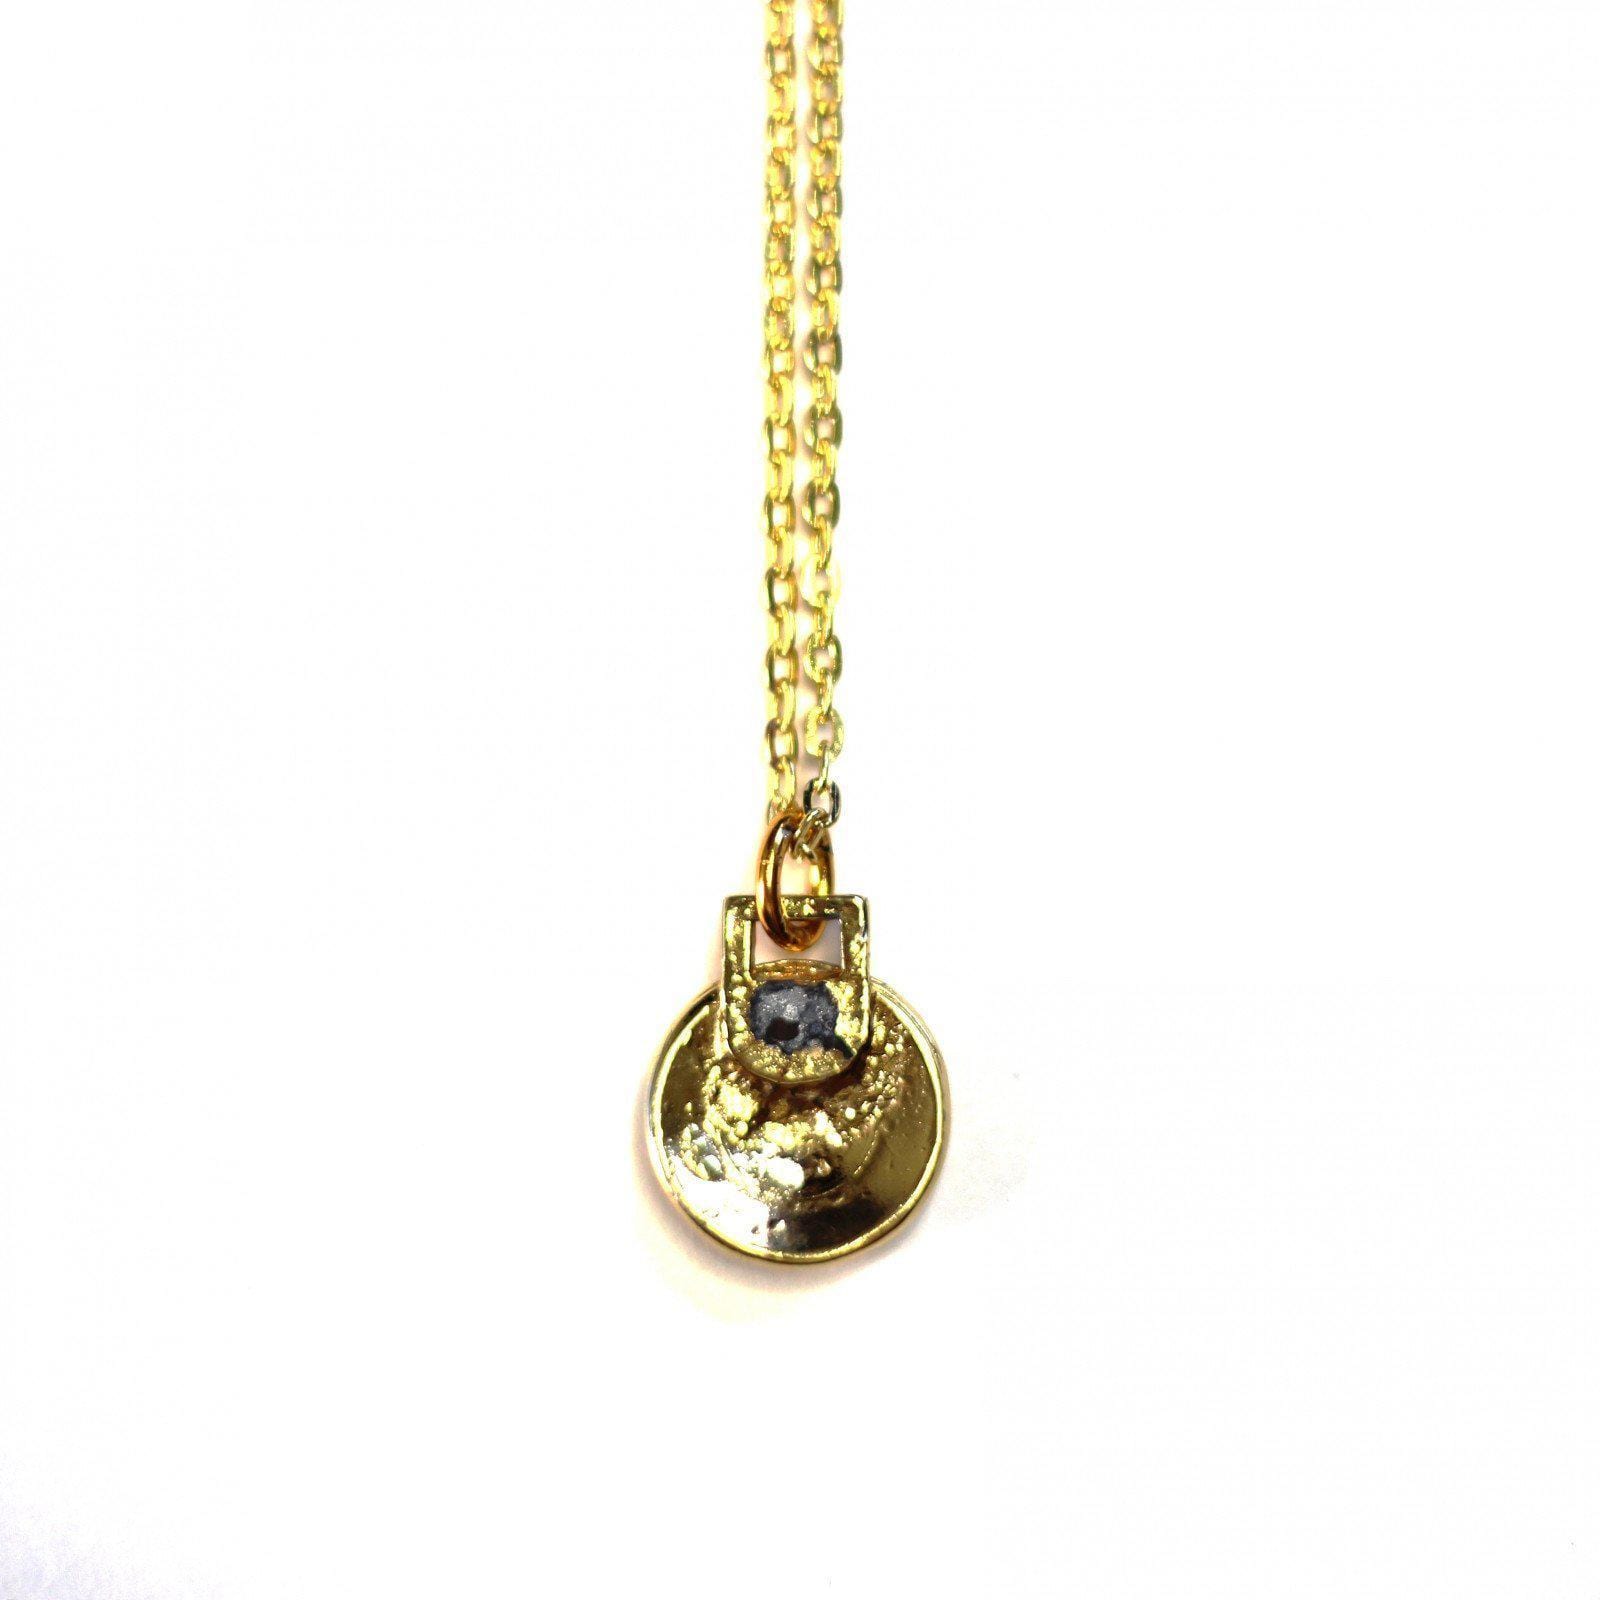 Small Gold Gianni Versace Upside Down Medusa Head Coin Pendent Chain with Greek Key Accents RSTKD Vintage